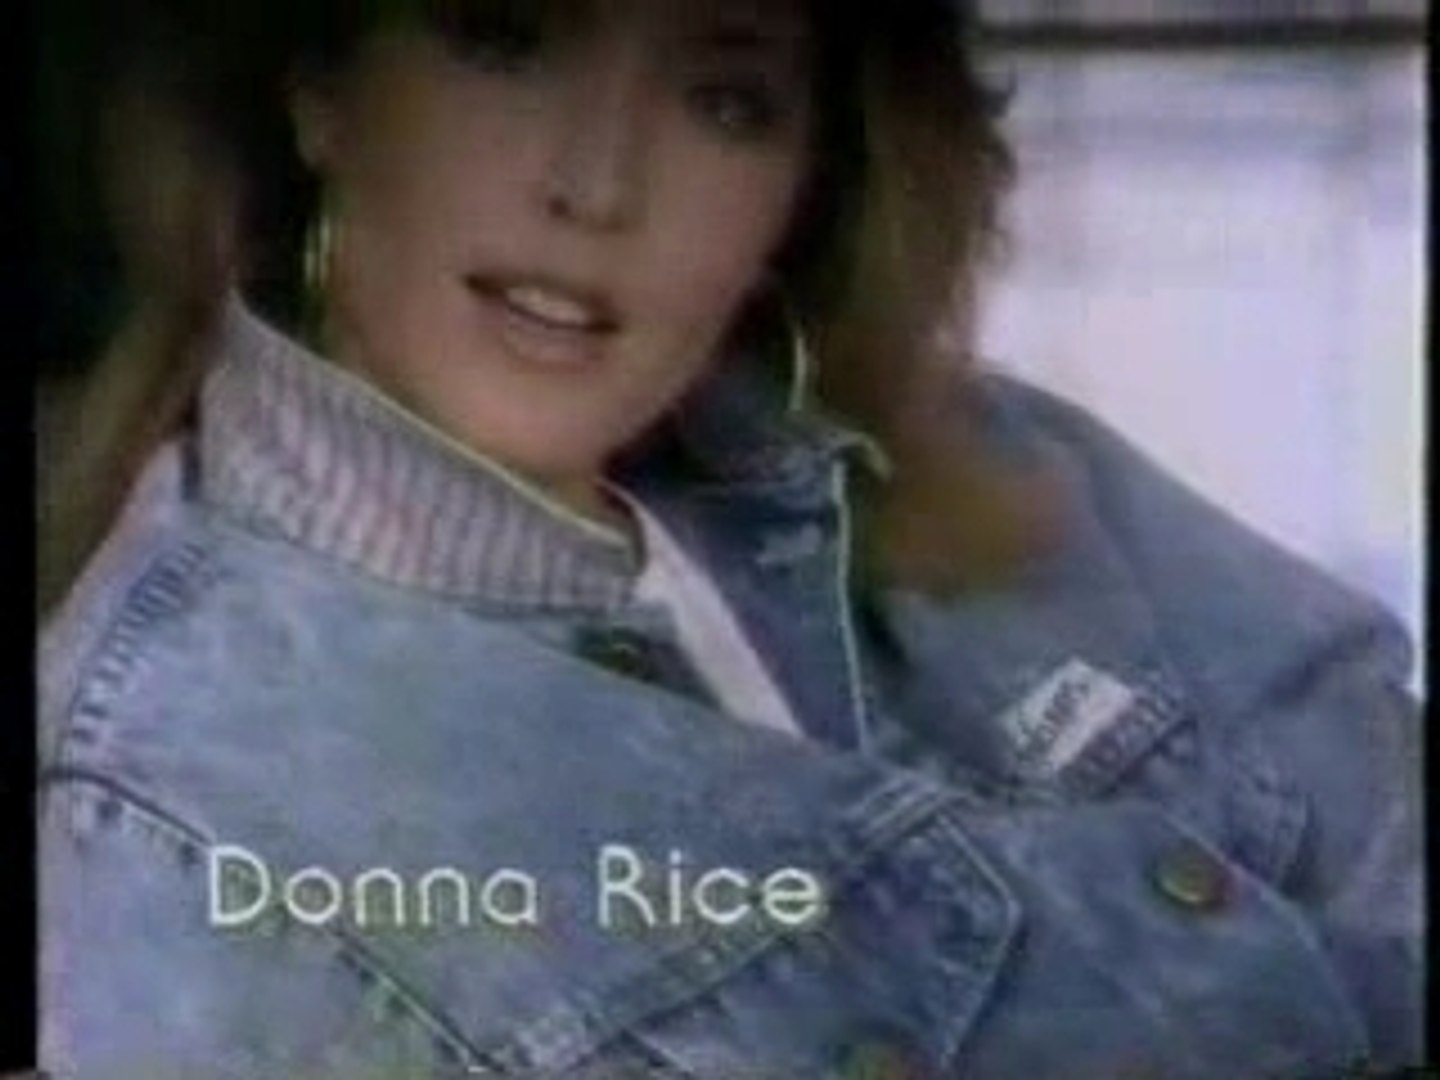 Donna rice images